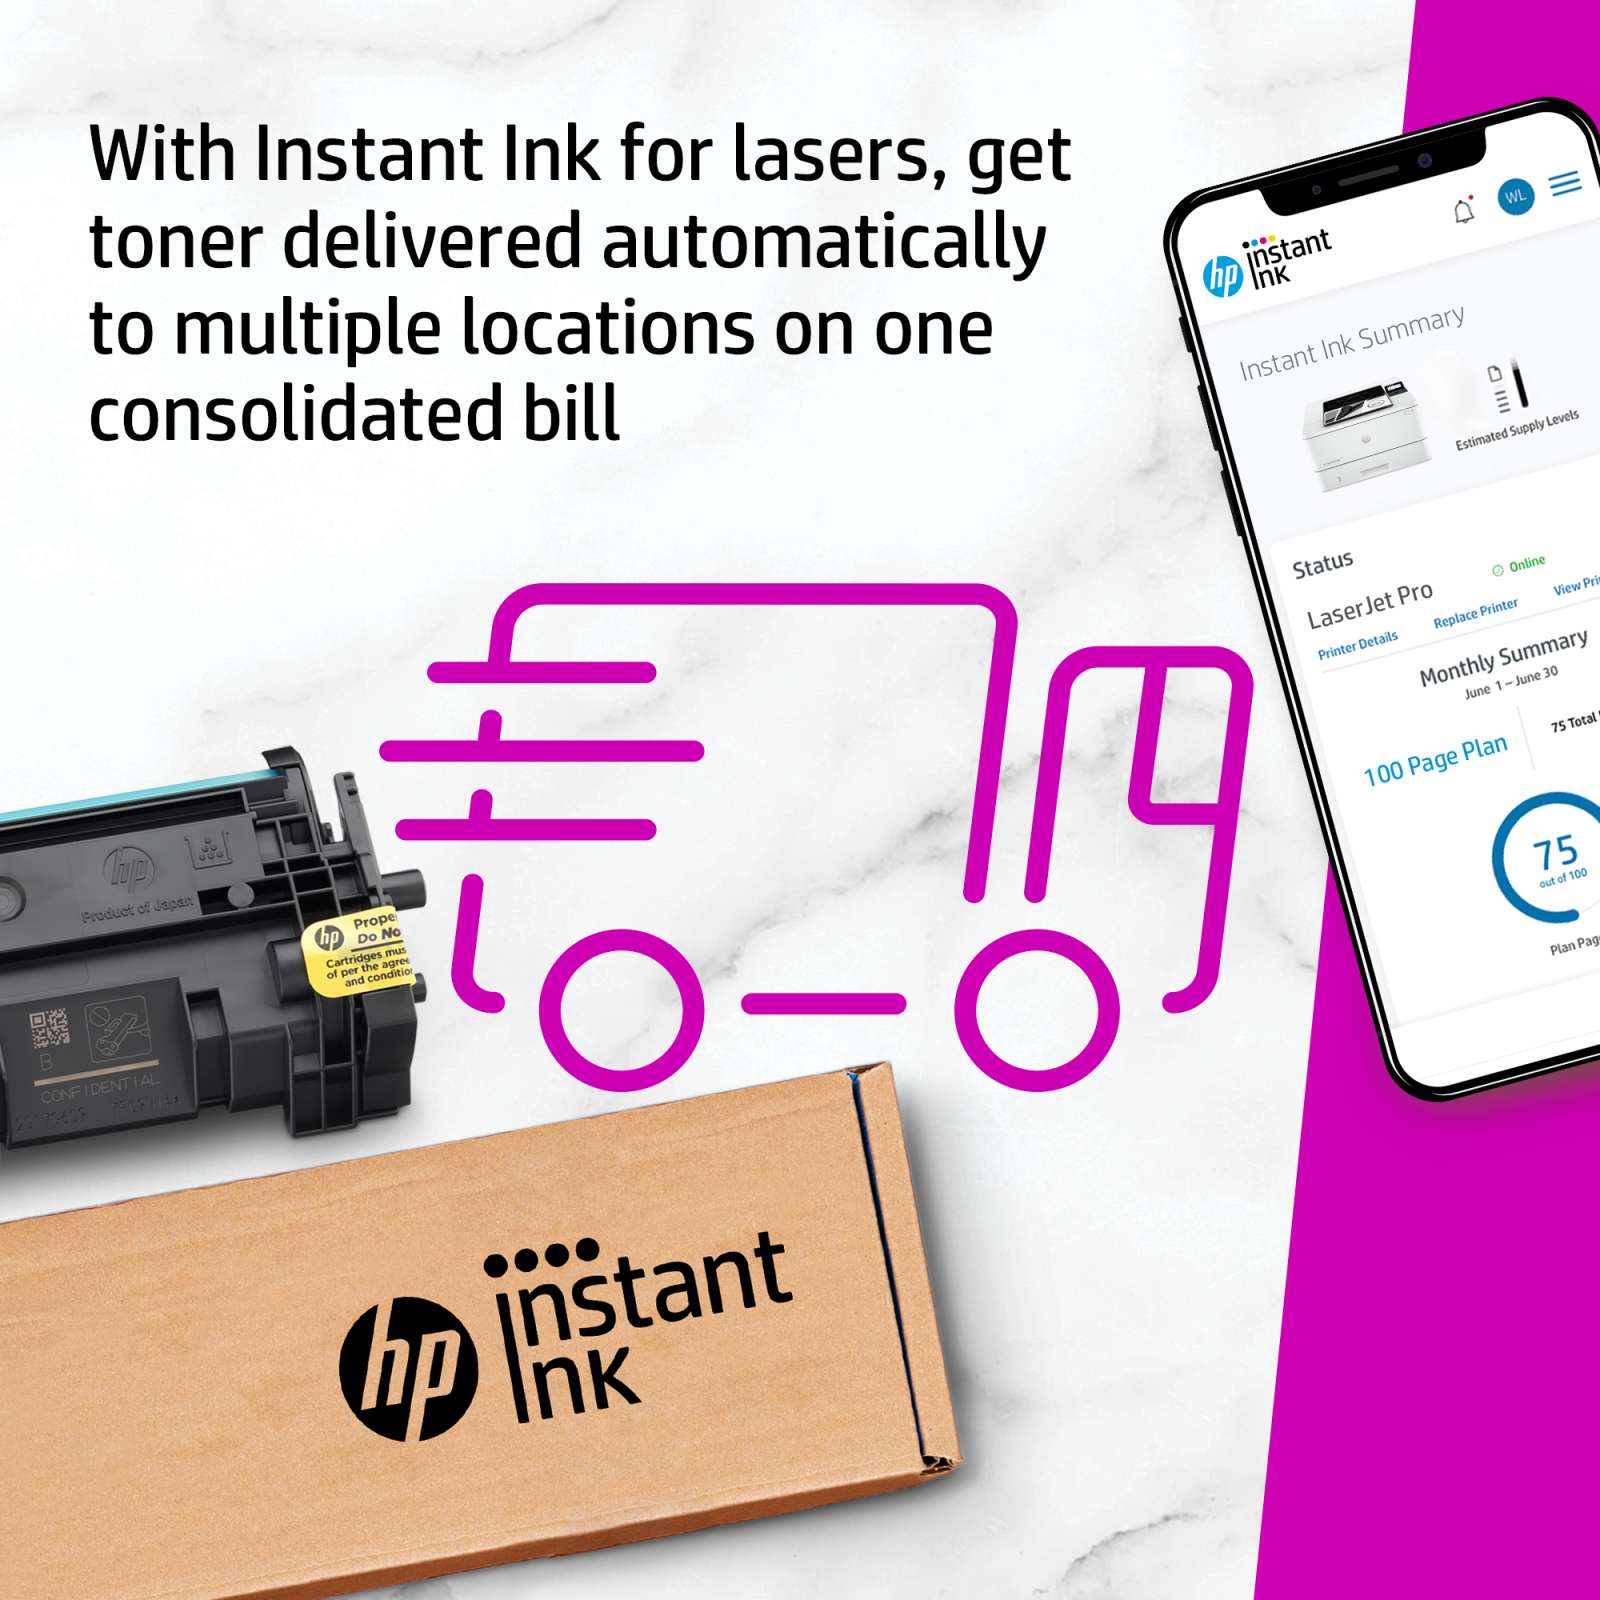 Tired of running out of #toner cartridges? Reply to hear about @HP Instant Ink, the convenient toner subscription service that delivers cartridges to multiple locations while consolidating them on one bill.